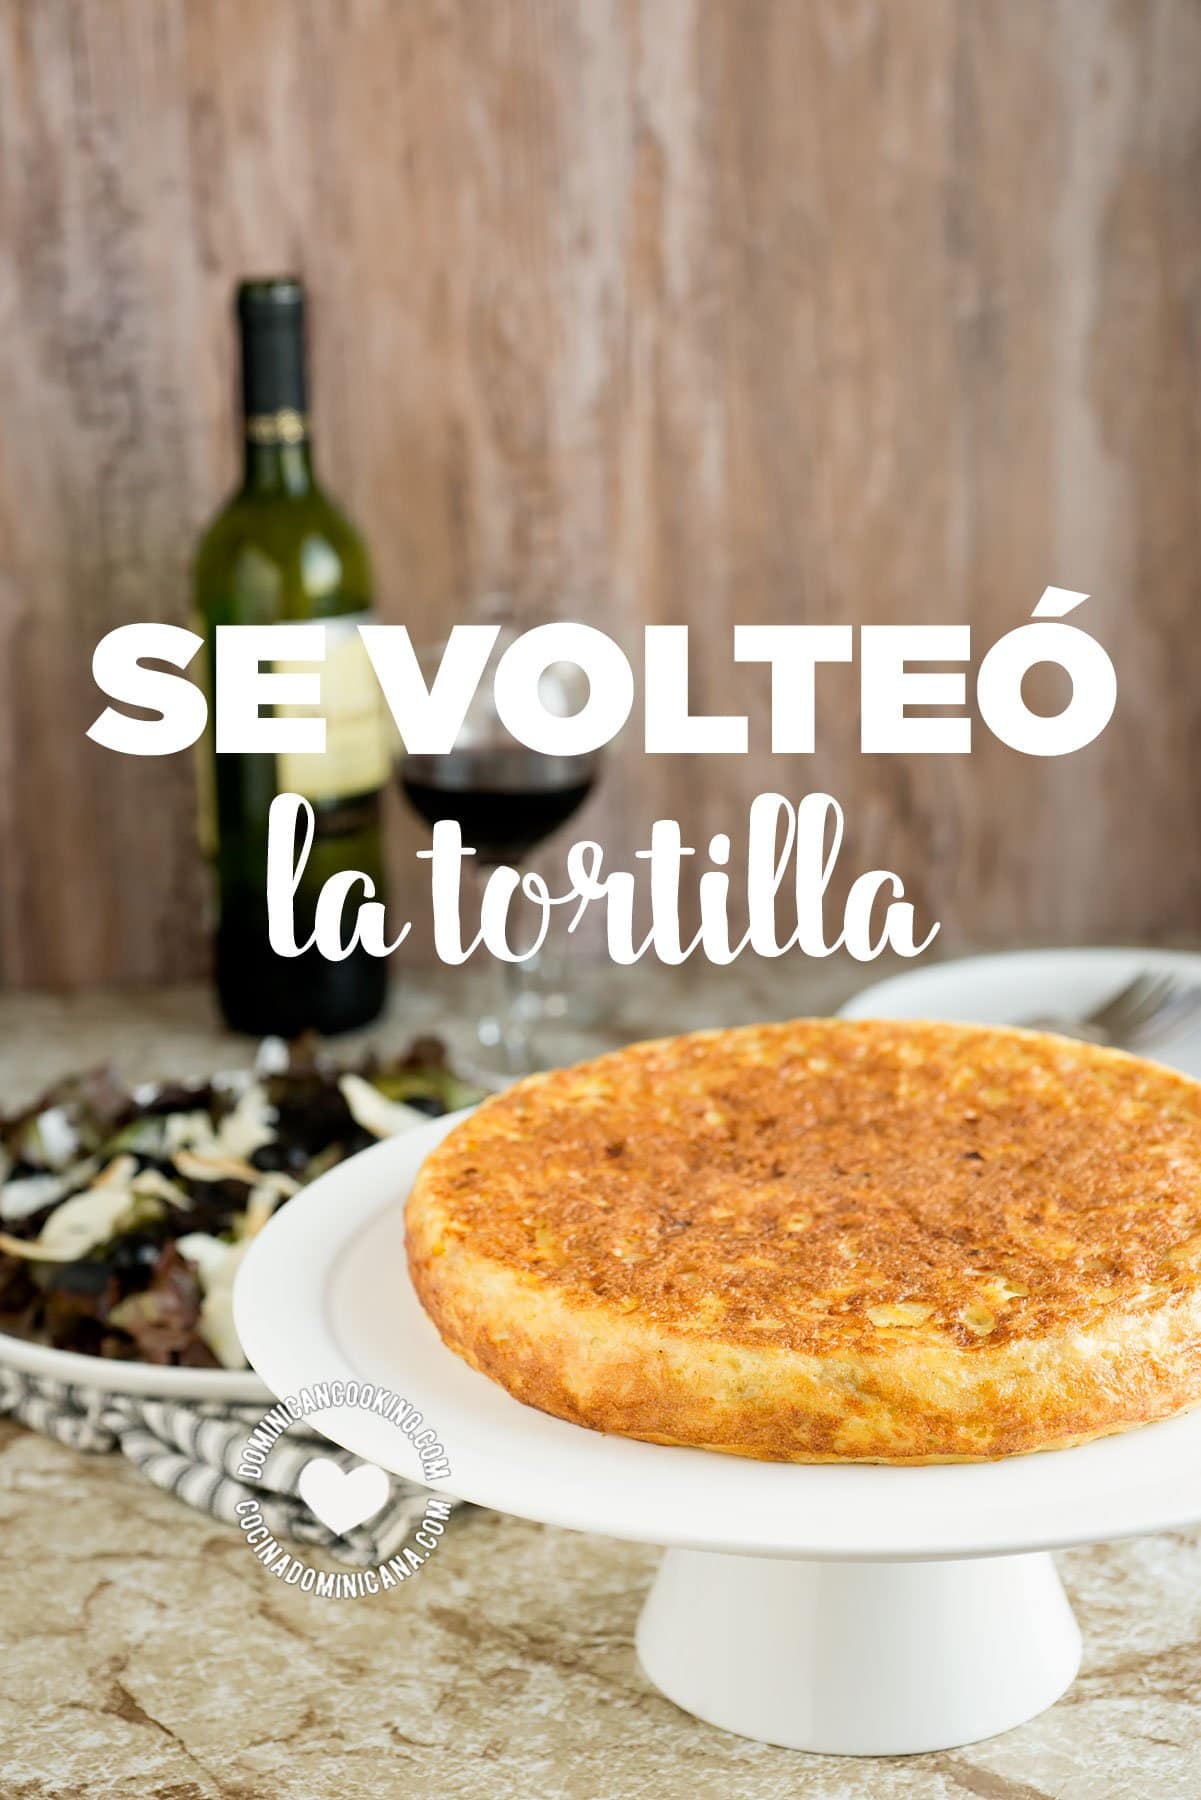 potato omelette with spanish text